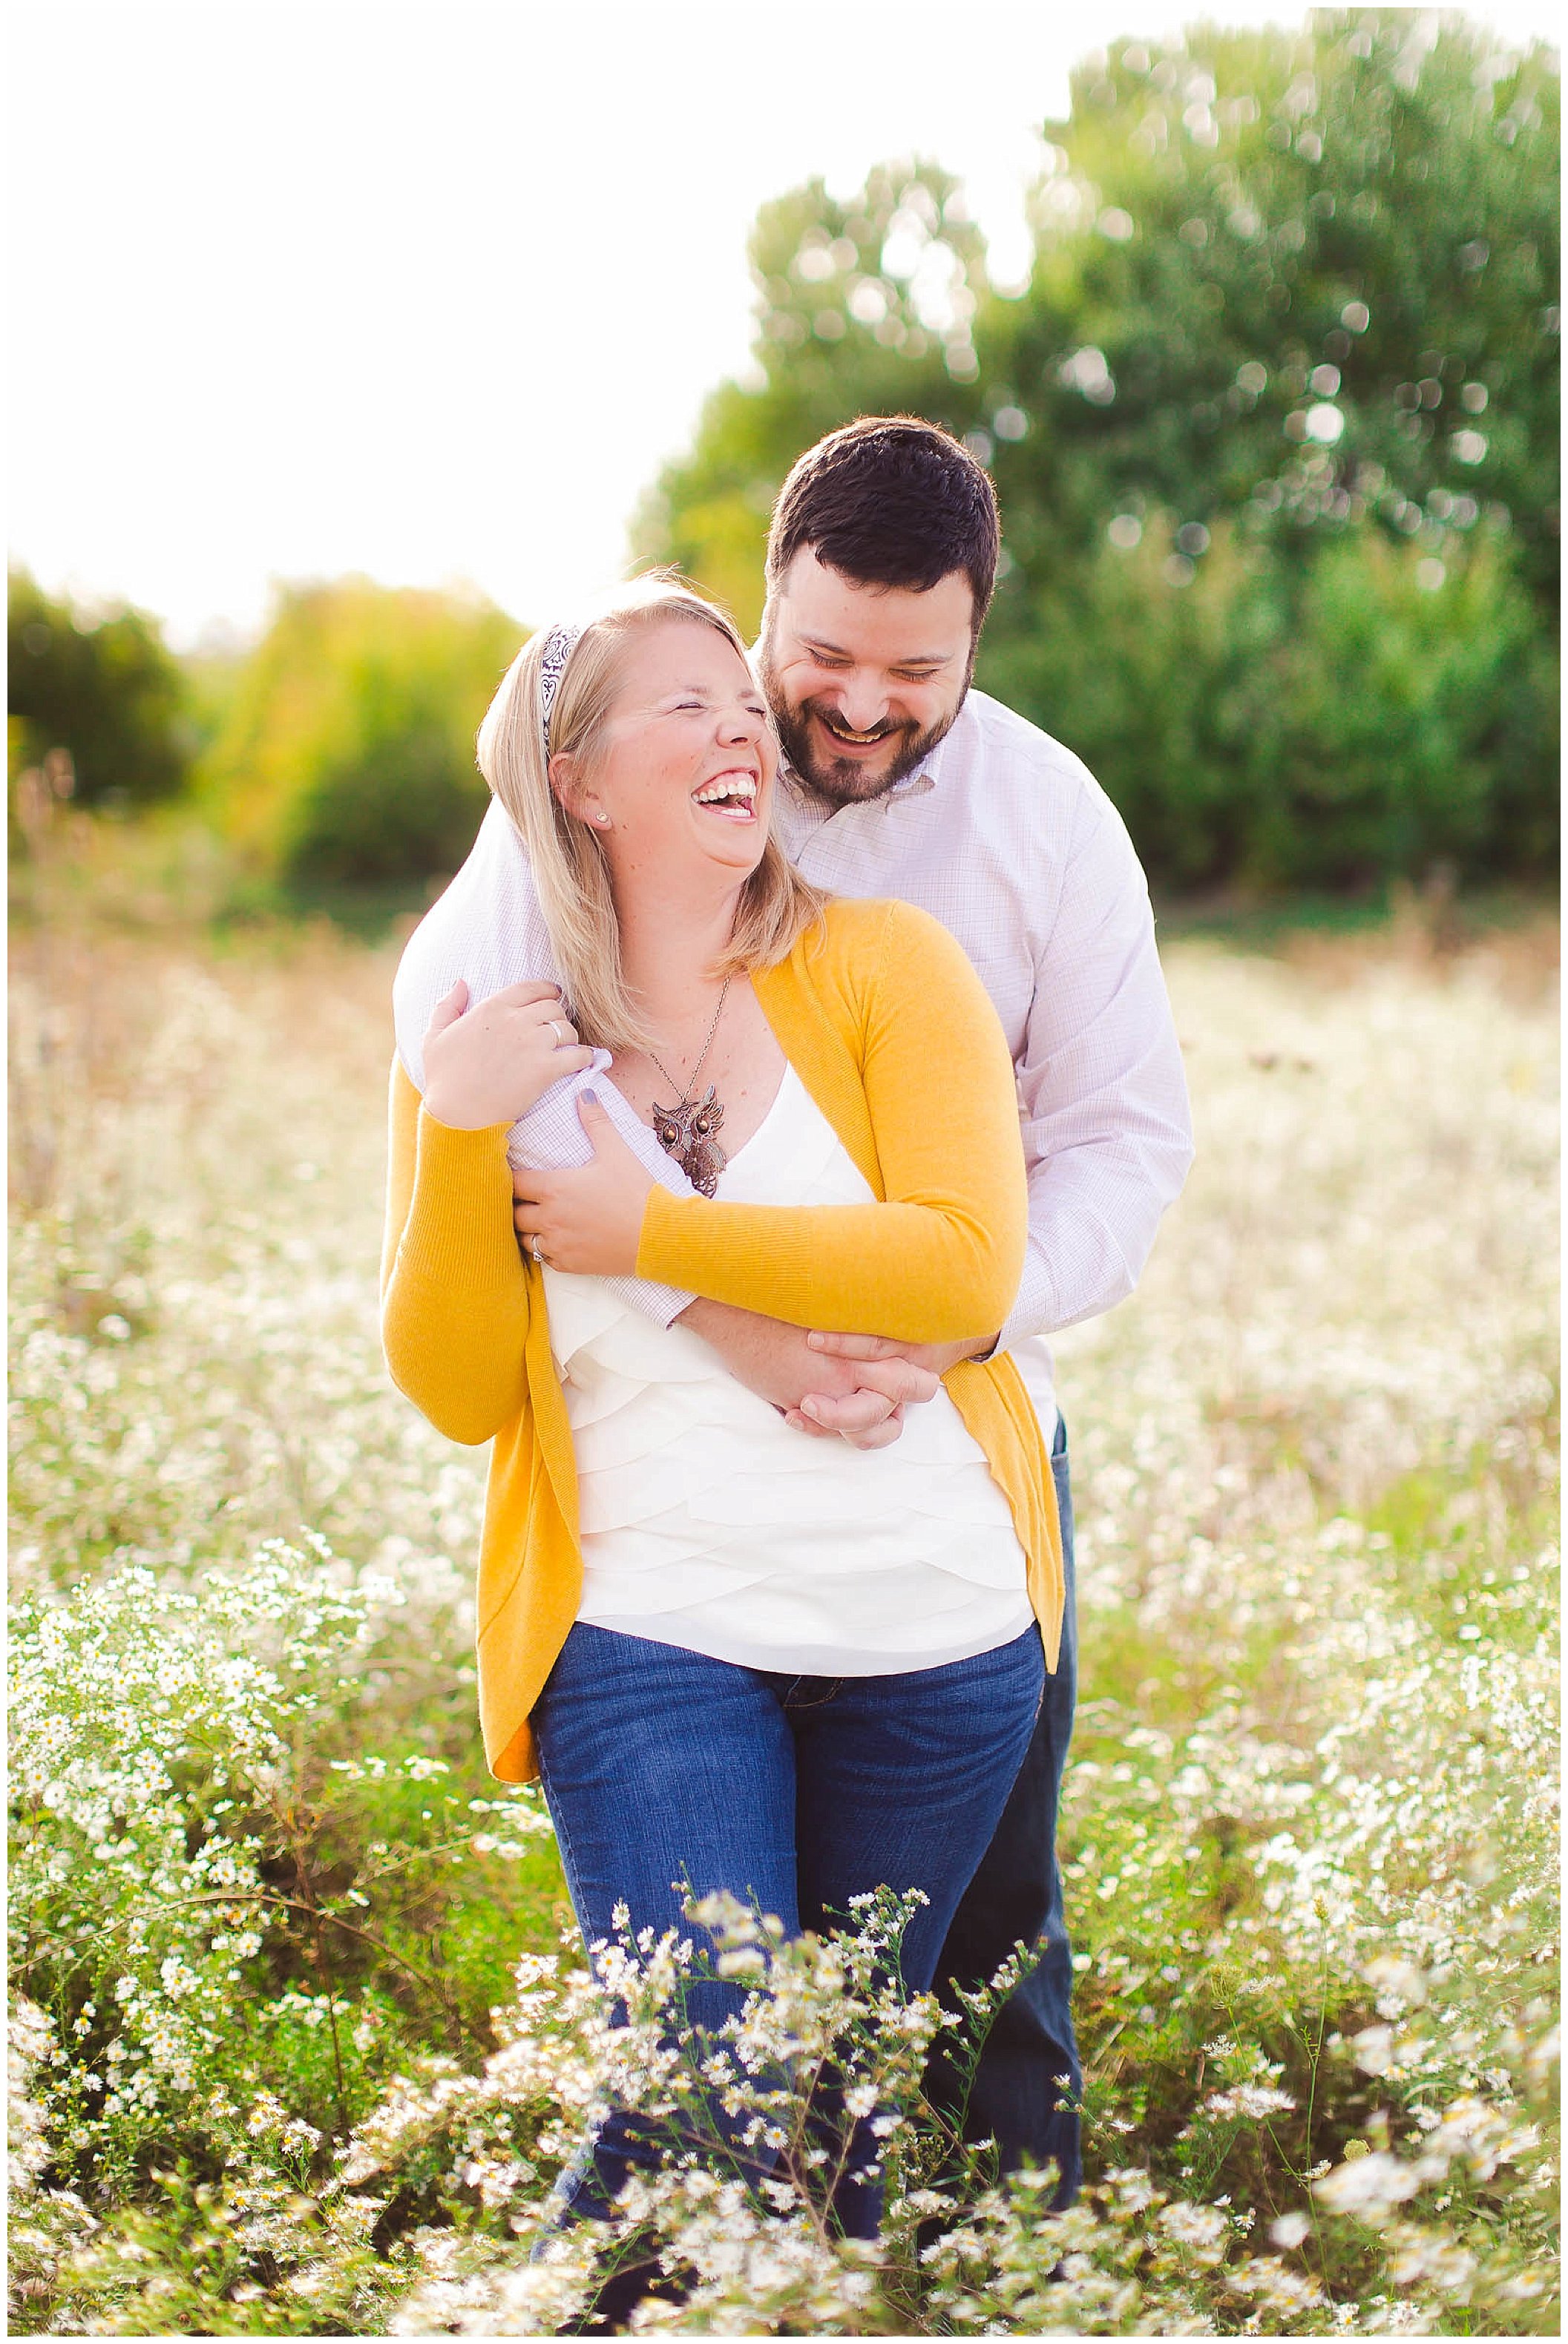 Sunshine filled engagement session in a field of wildflowers, Fort Wayne Indiana Wedding Photographer_0002.jpg